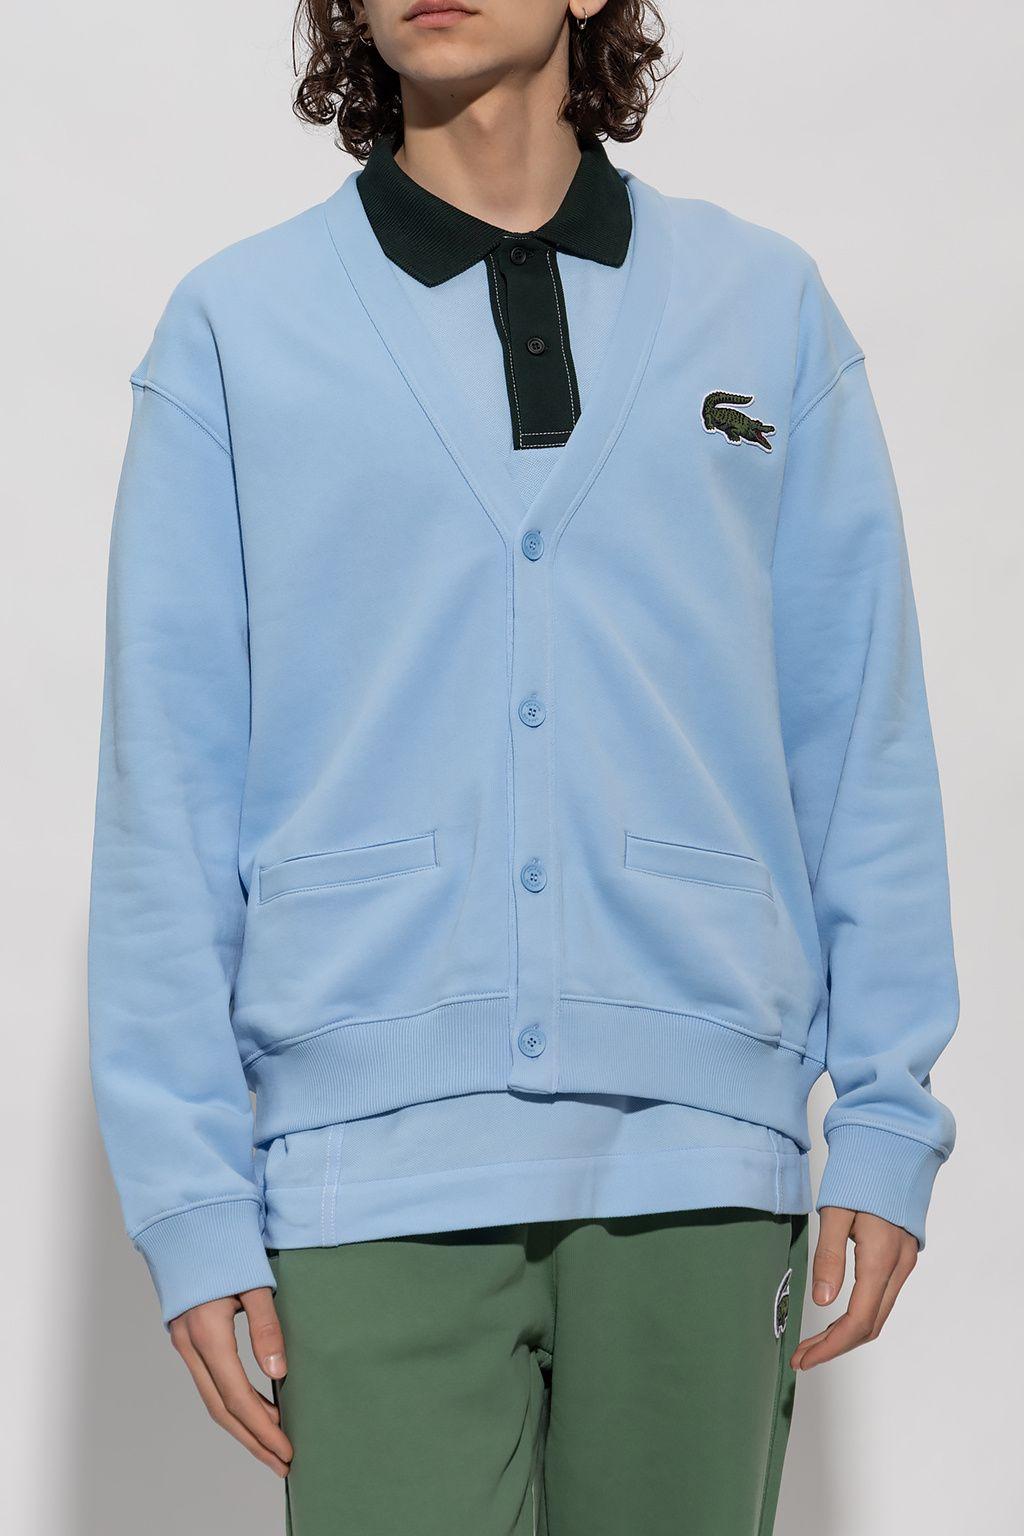 Lacoste Cardigan With Logo in Blue | Lyst